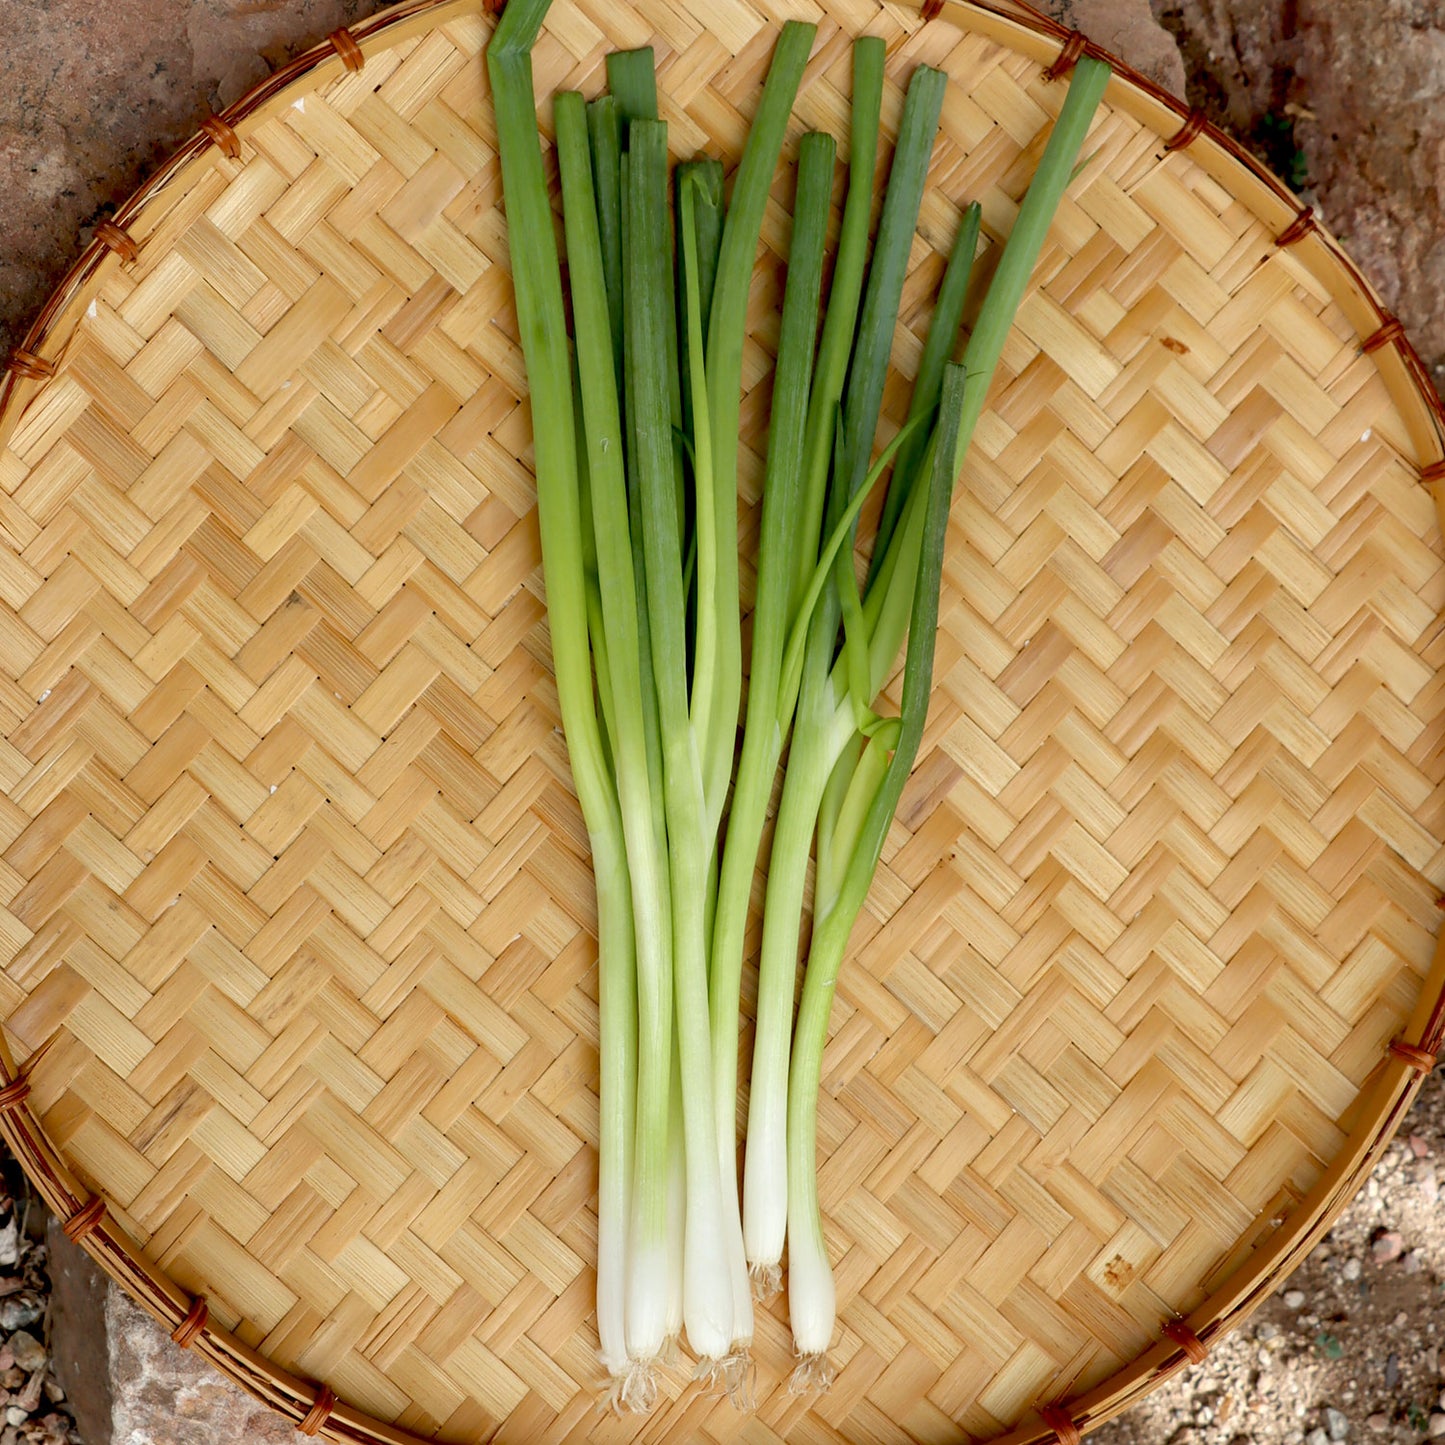 Green onions: A delicious bunching onion. Leave some in the garden to regrow new bunches. Evergreen is a true multiplier onion and will divide itself perennially.